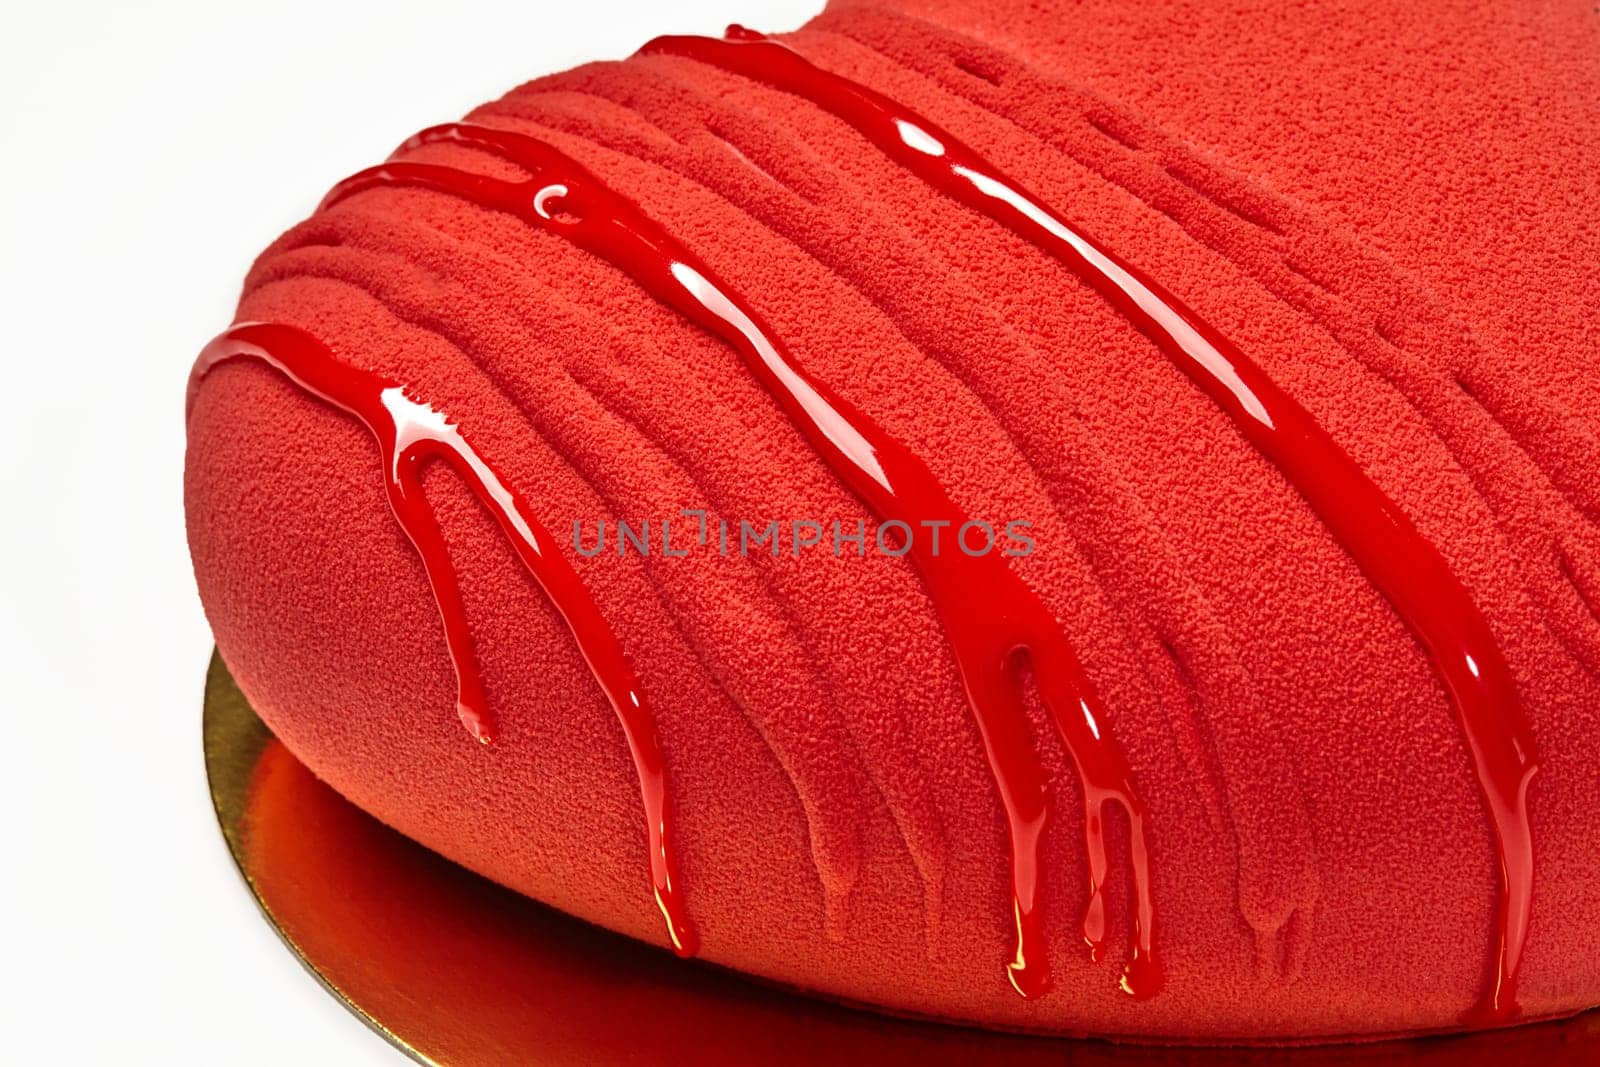 Closeup of velvet texture of vibrant red heart-shaped cake topped with glossy icing on gold cardboard, isolated on white background. Romantic delicious gift for Valentines Day